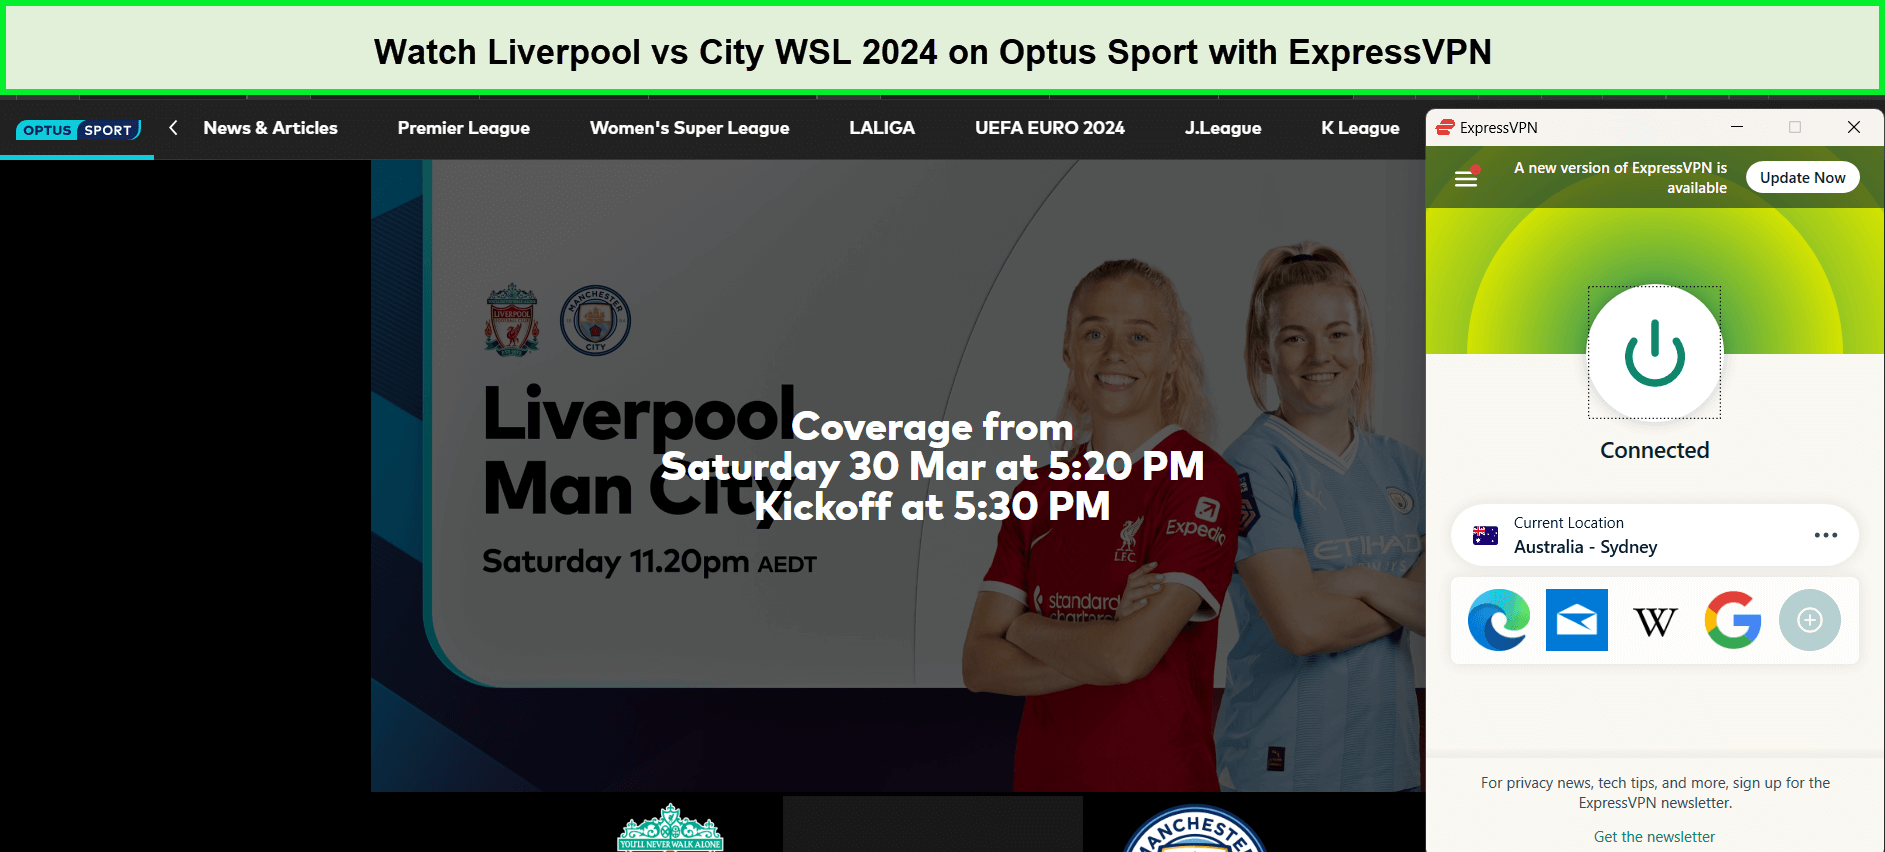 watch-Liverpool-vs-City-WSL-2024-in-Spain-on-Optus-Sport-with-expressvpn